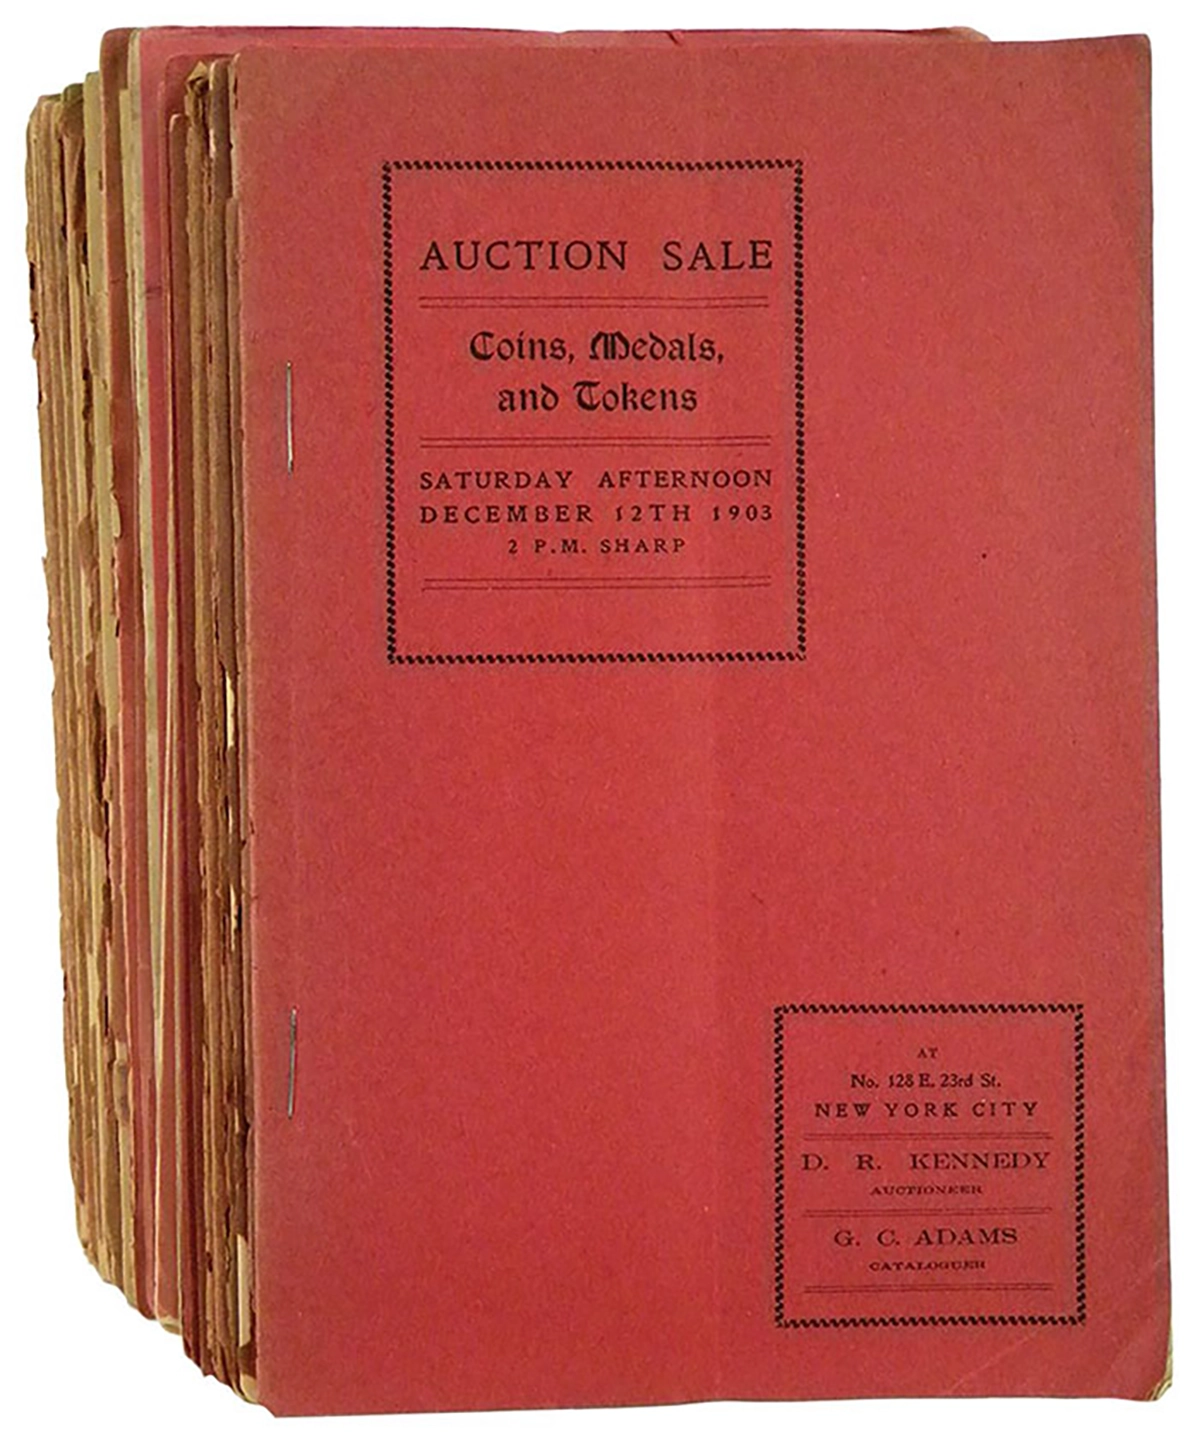 A complete run of G.C. Adams auction catalogs. Image: Kolbe & Fanning.